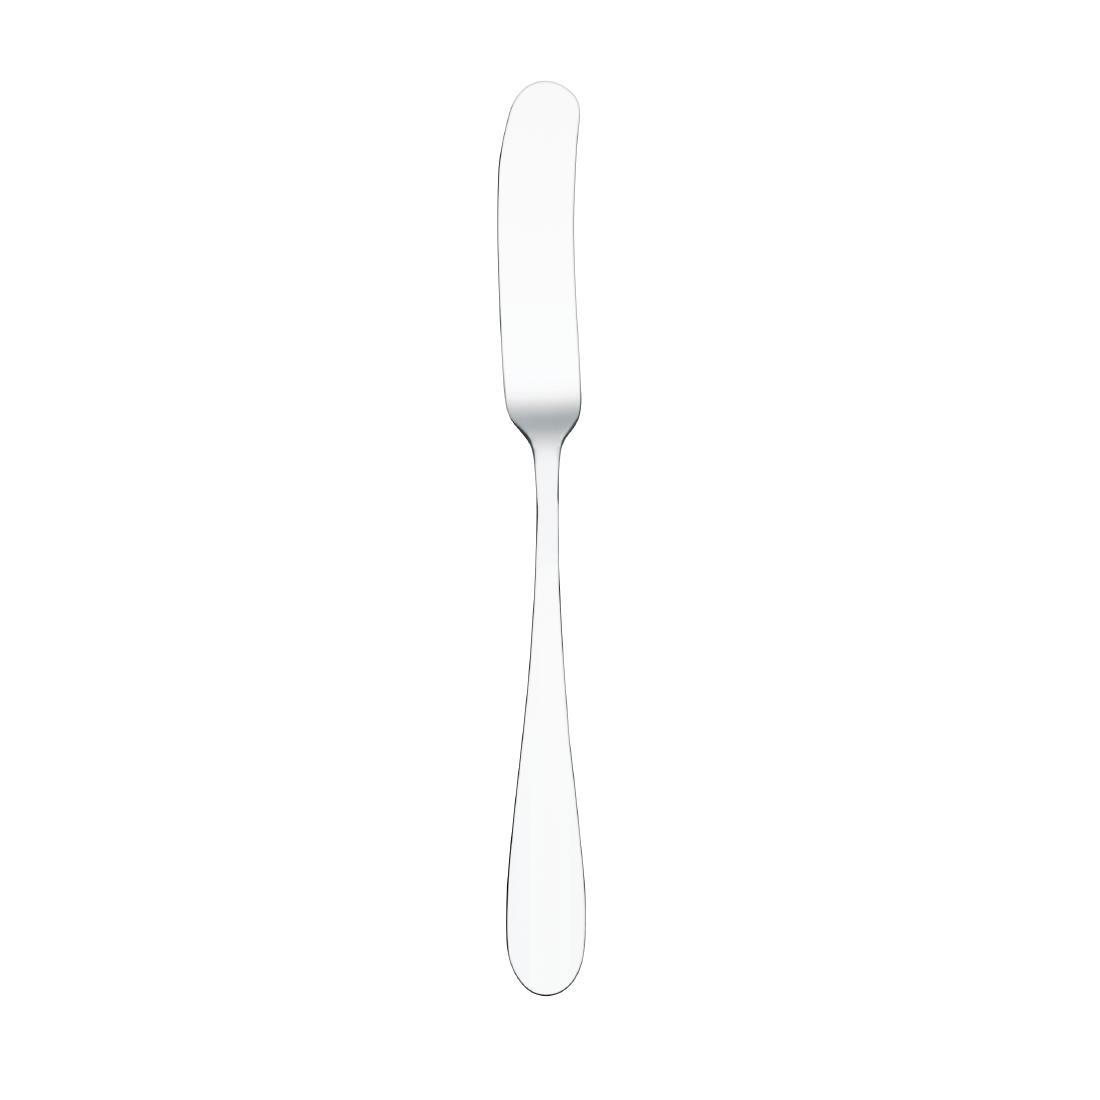 Olympia Buckingham Butter Knives (Pack of 12) - CY803  - 2